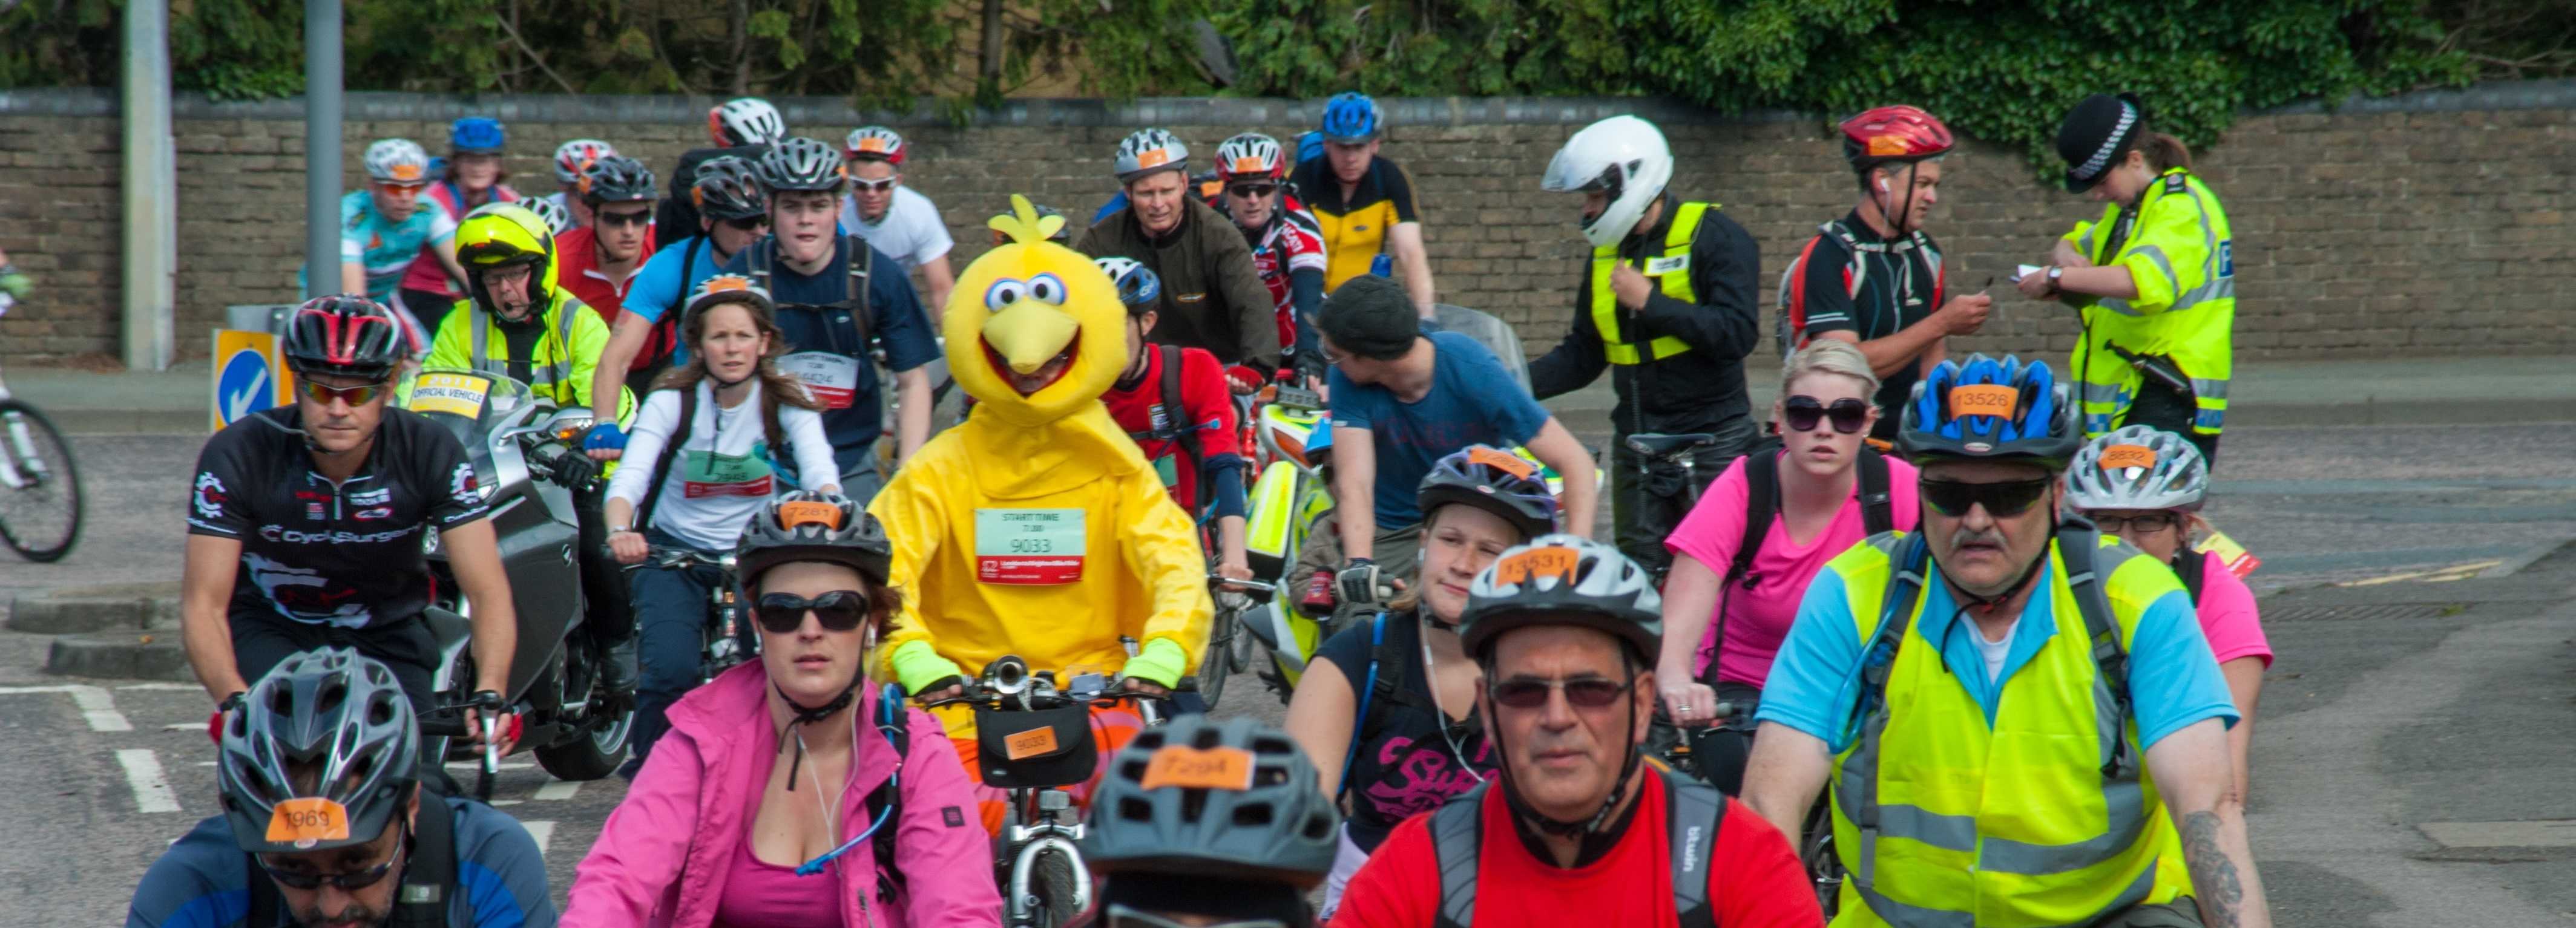 Picture of a group of people on bicycles with only one wearing a Big Bird costume in the middle of the group.